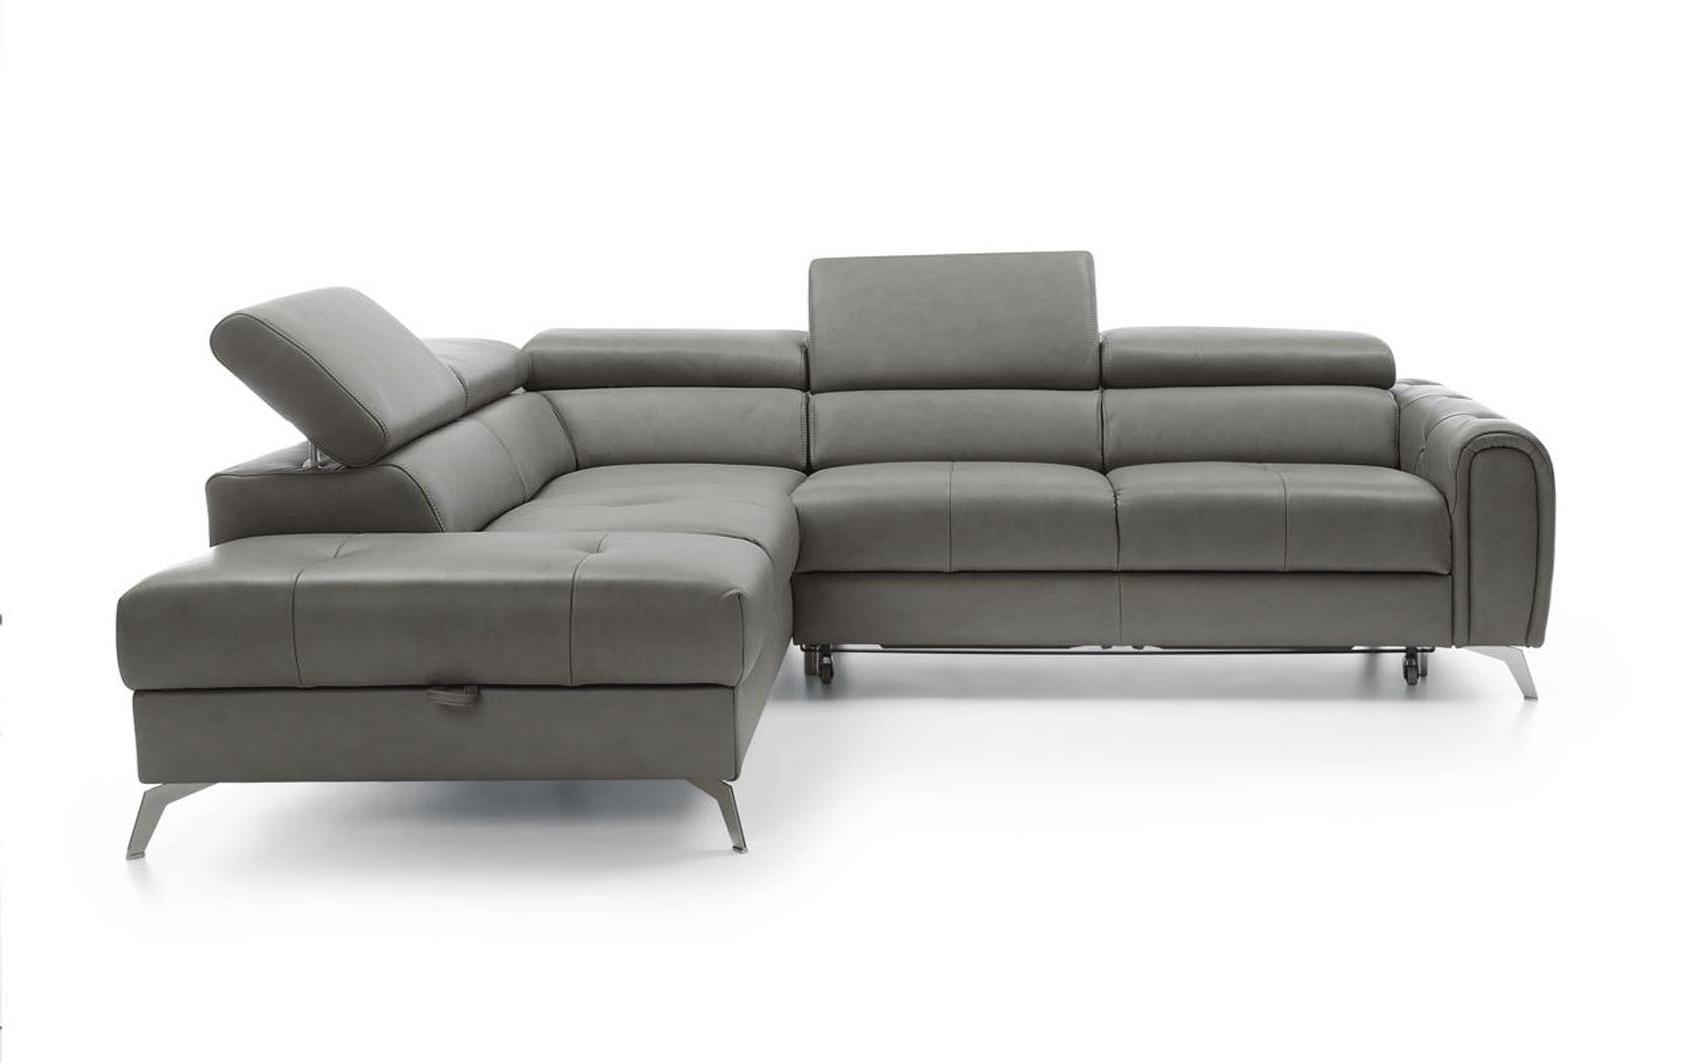 

    
CAMELIASECTIONALLEFT Grey Italian Genuine Leather Sectional Sofa Bed/Storage Modern Left ESF Camelia
